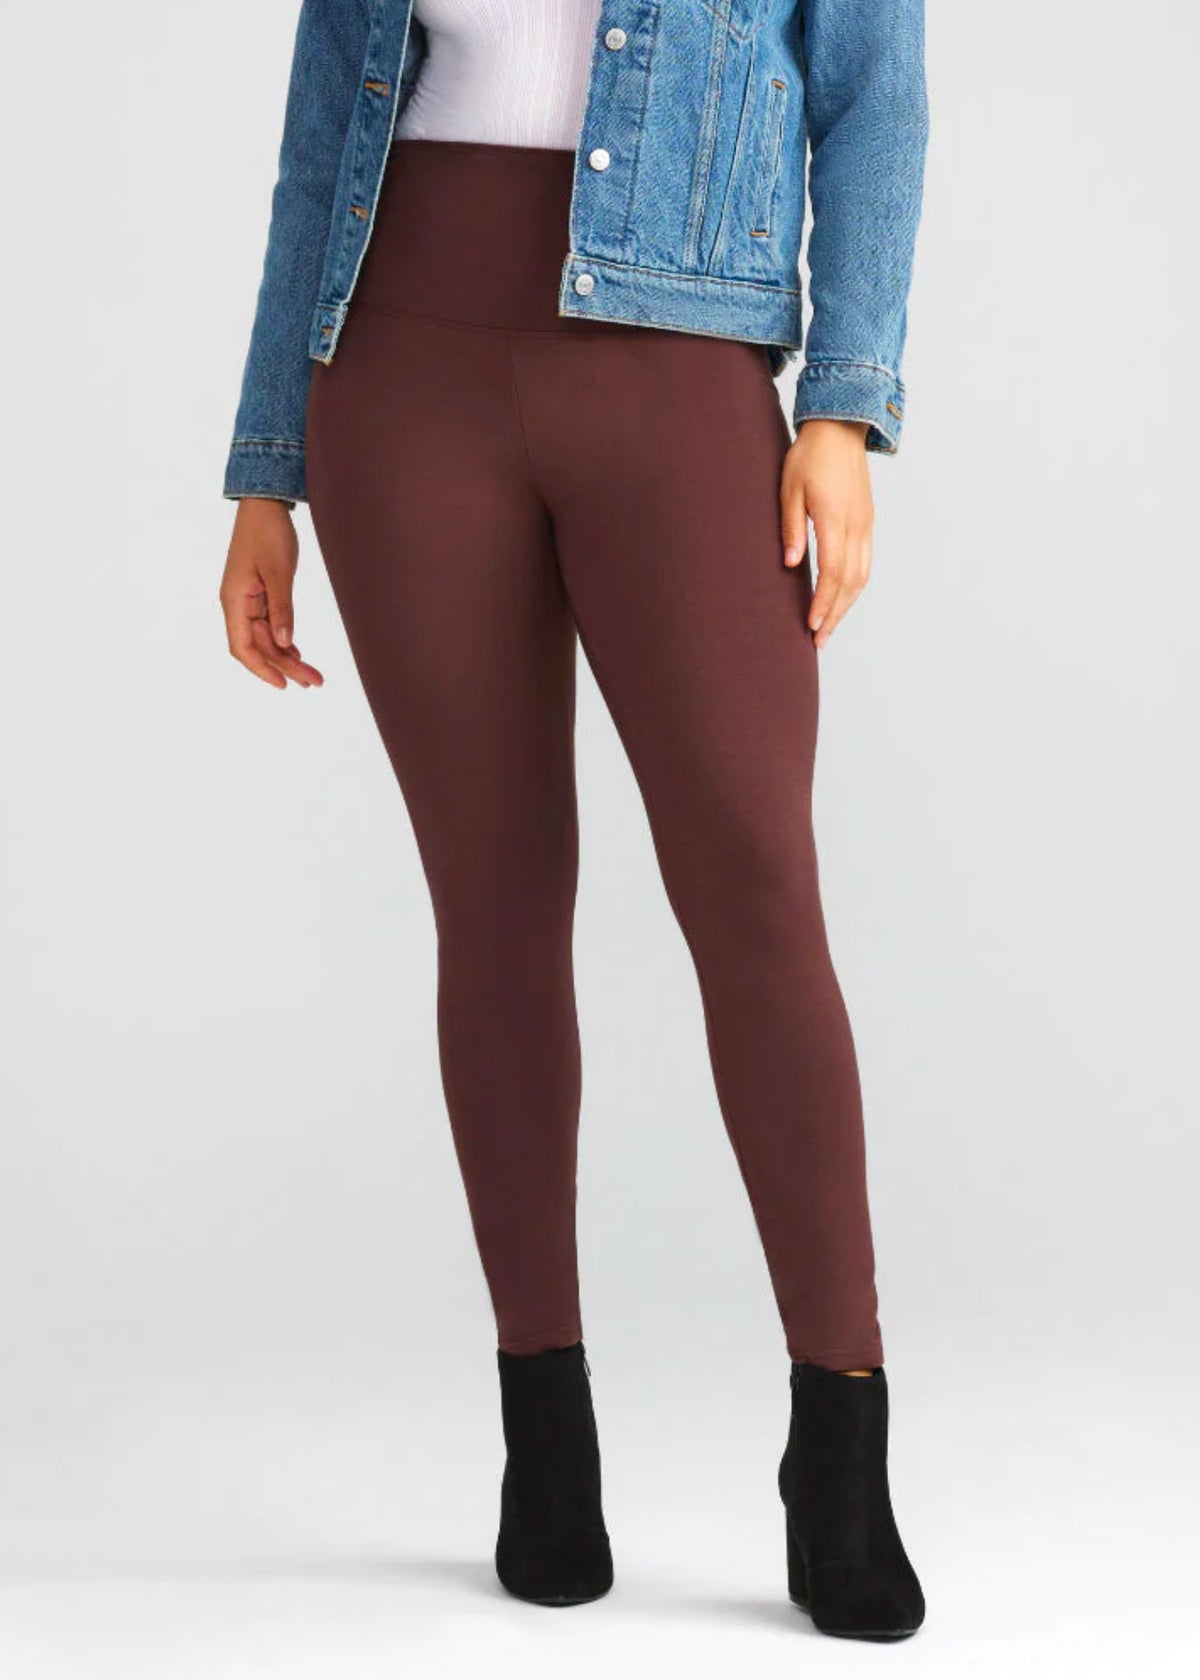 Ponte Shaping Legging from Yummie in Deep Mahogany  - 1